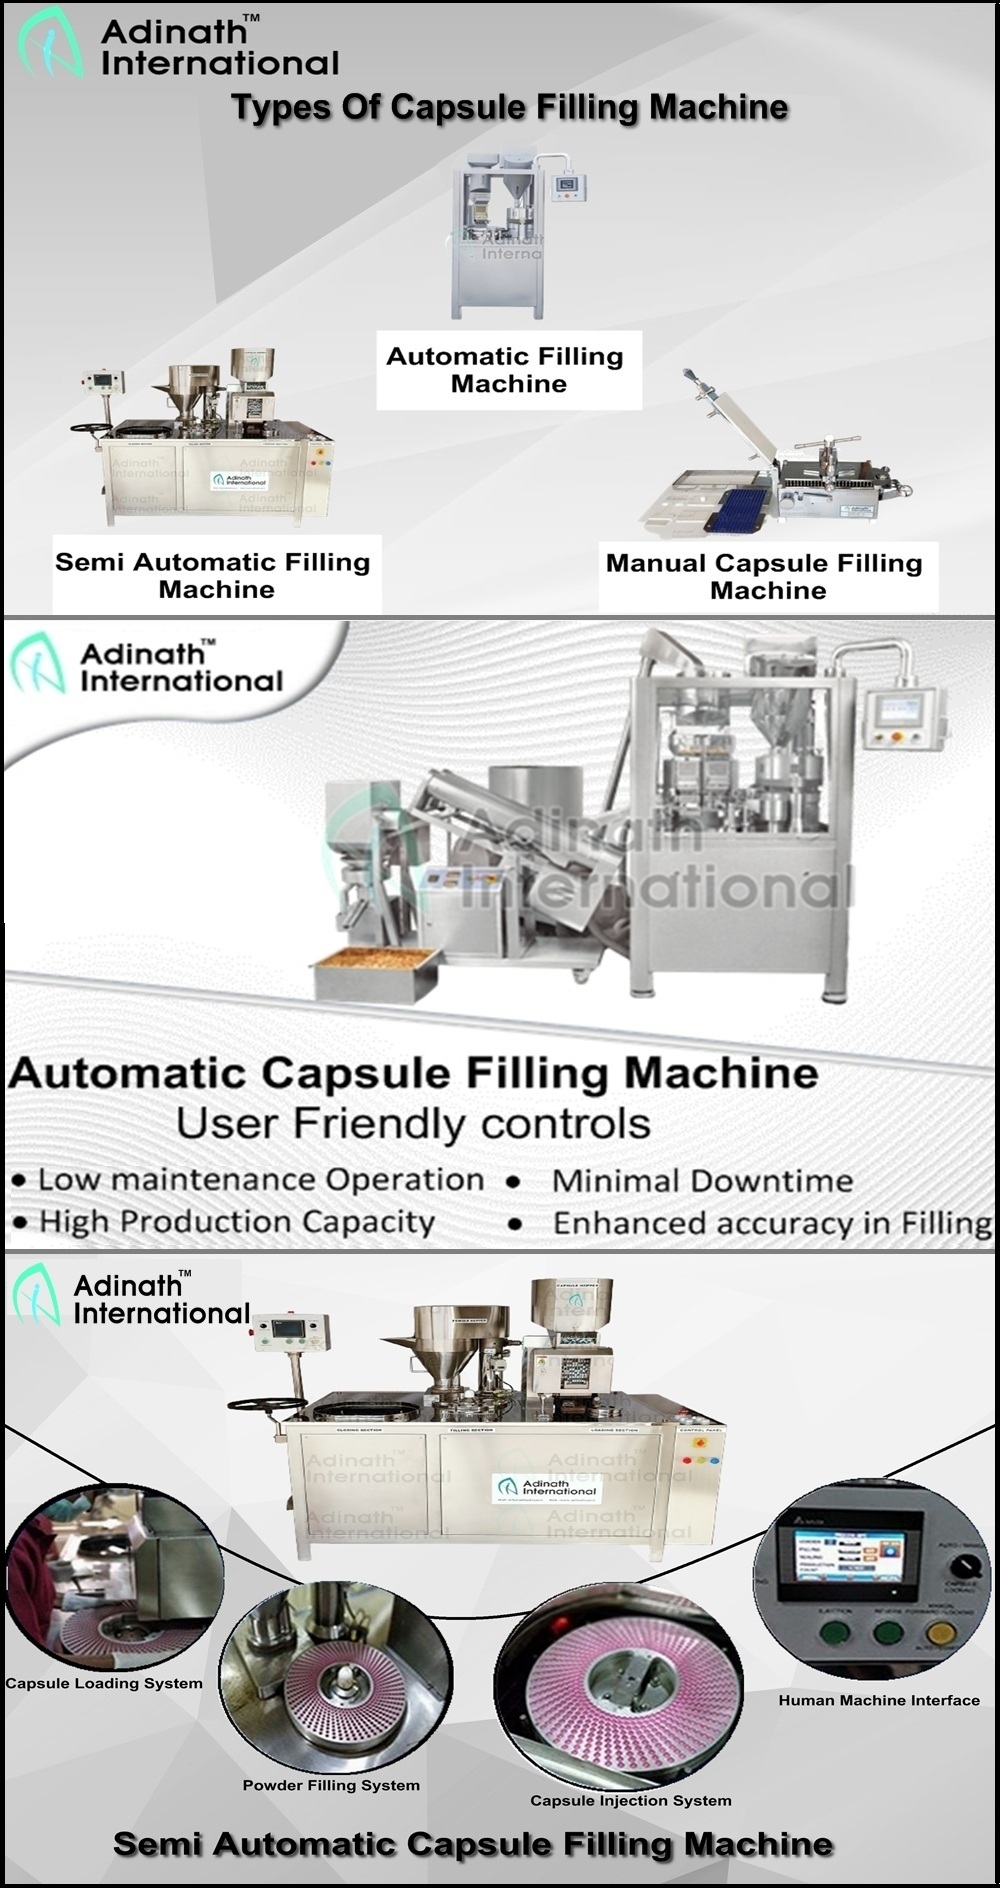 Information of Manual, Semi Automatic and Automatic Capsule Filling Machine